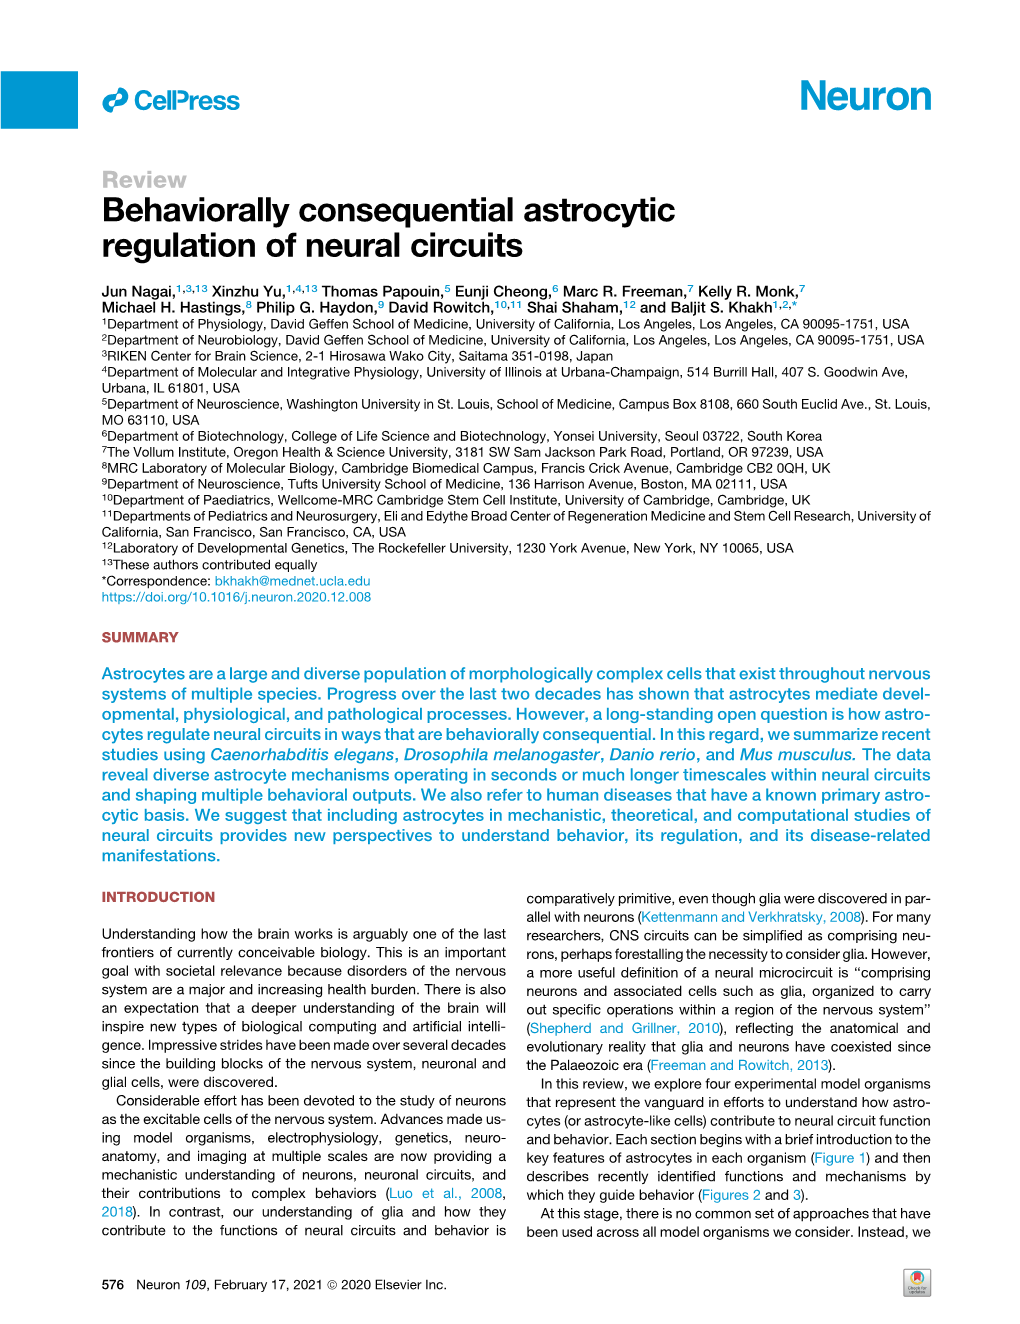 Behaviorally Consequential Astrocytic Regulation of Neural Circuits